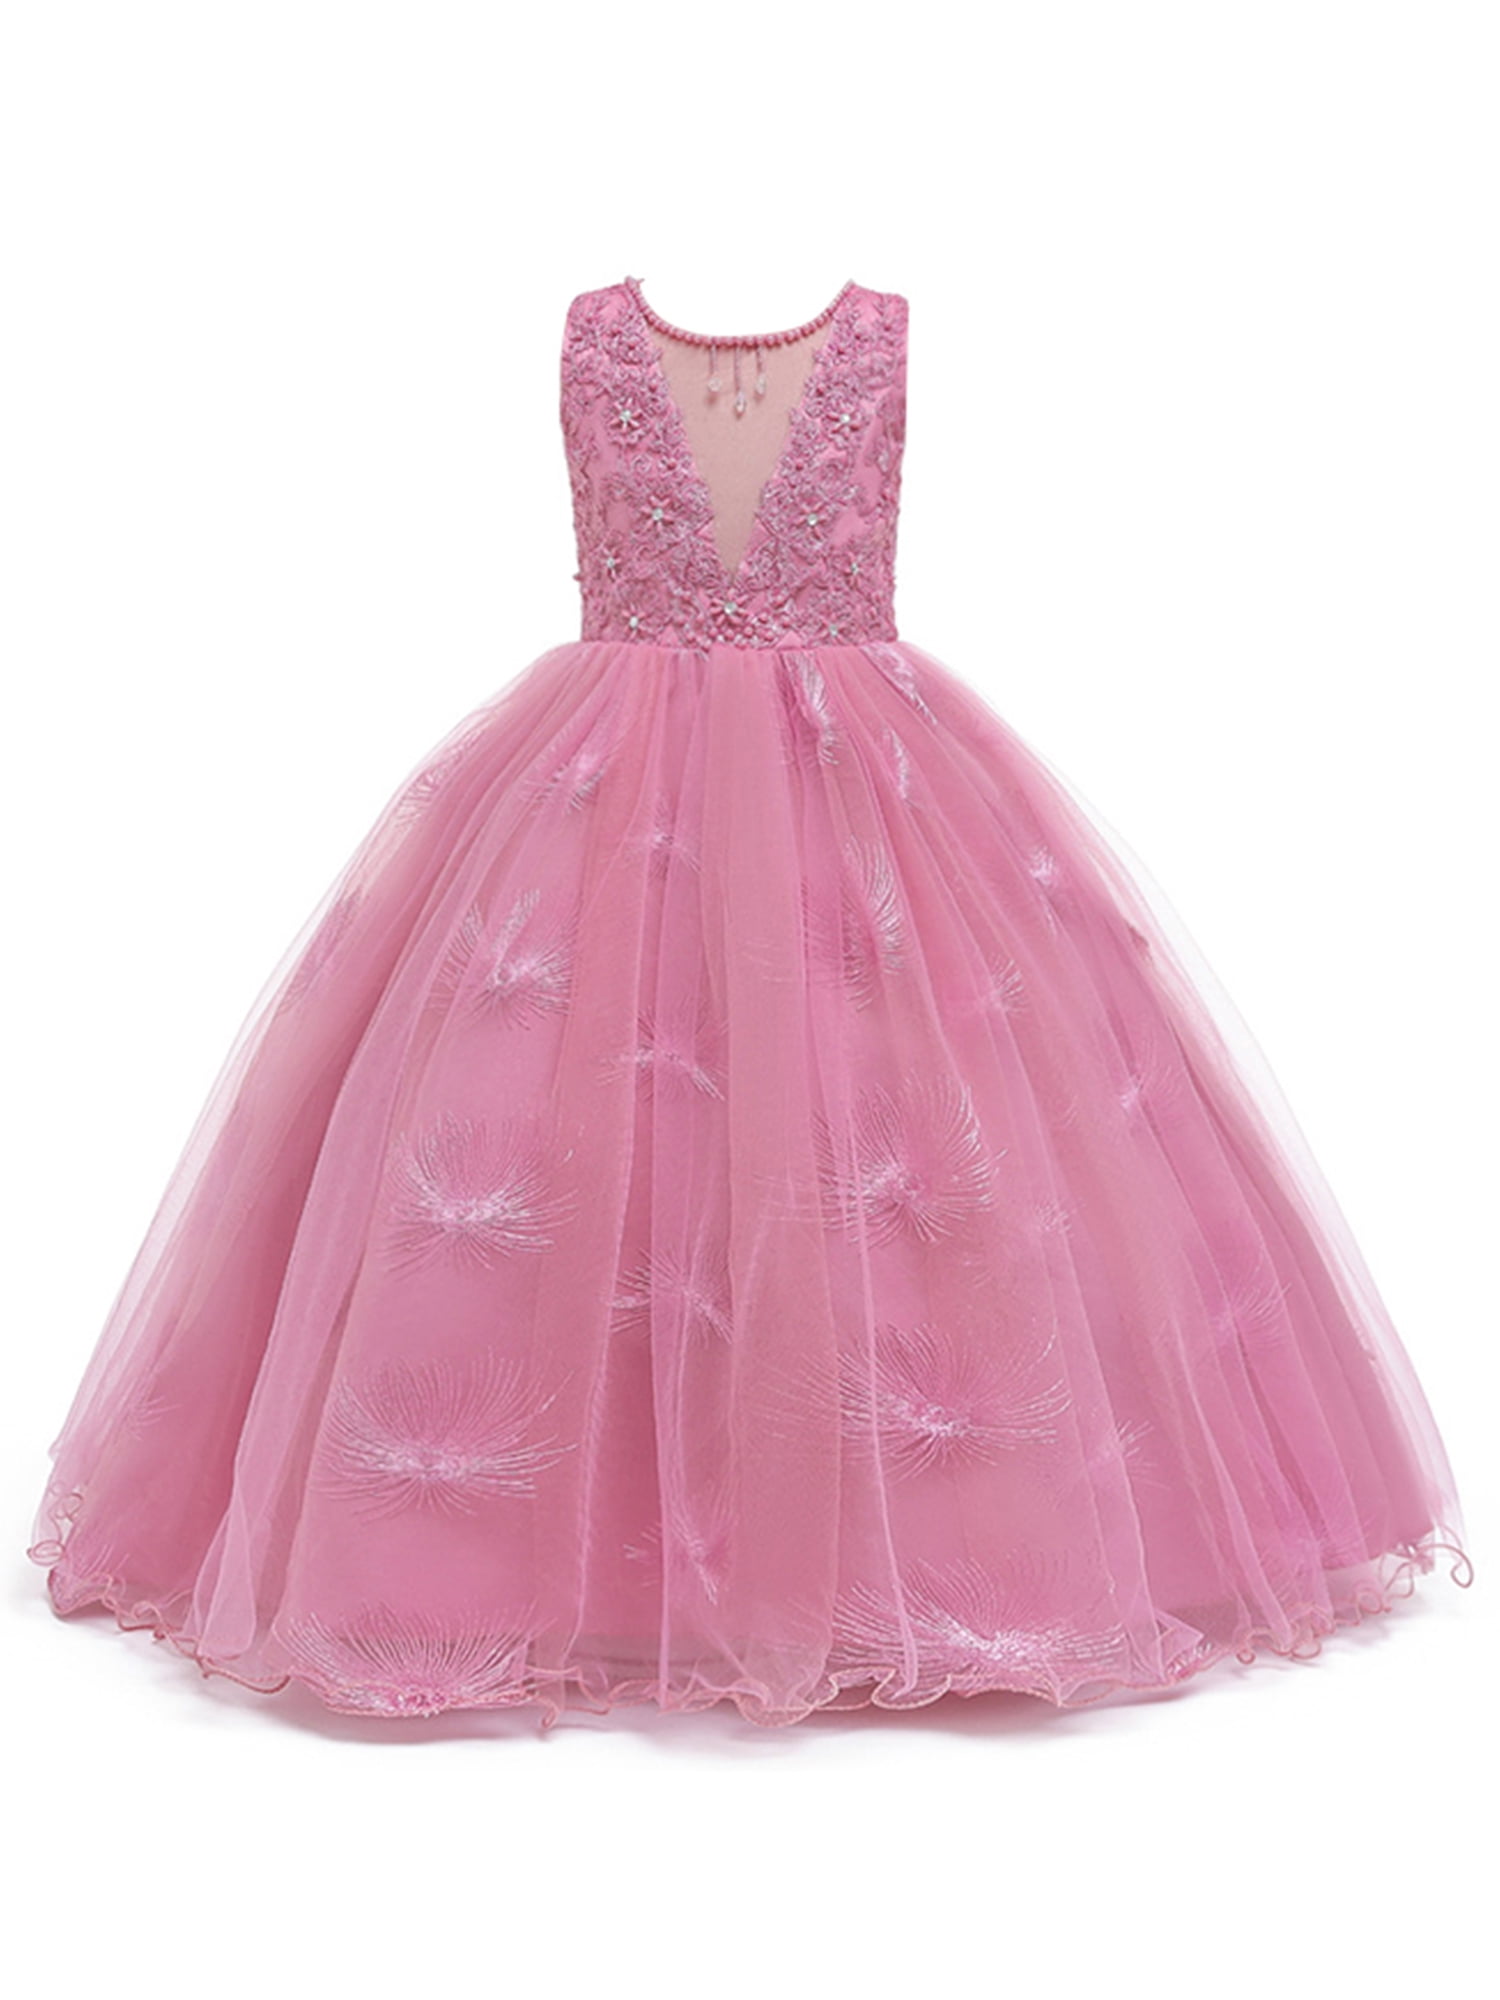 Kids Flower Girl Bow Princess Dress for Girls Party Wedding Bridesmaid Gown O89